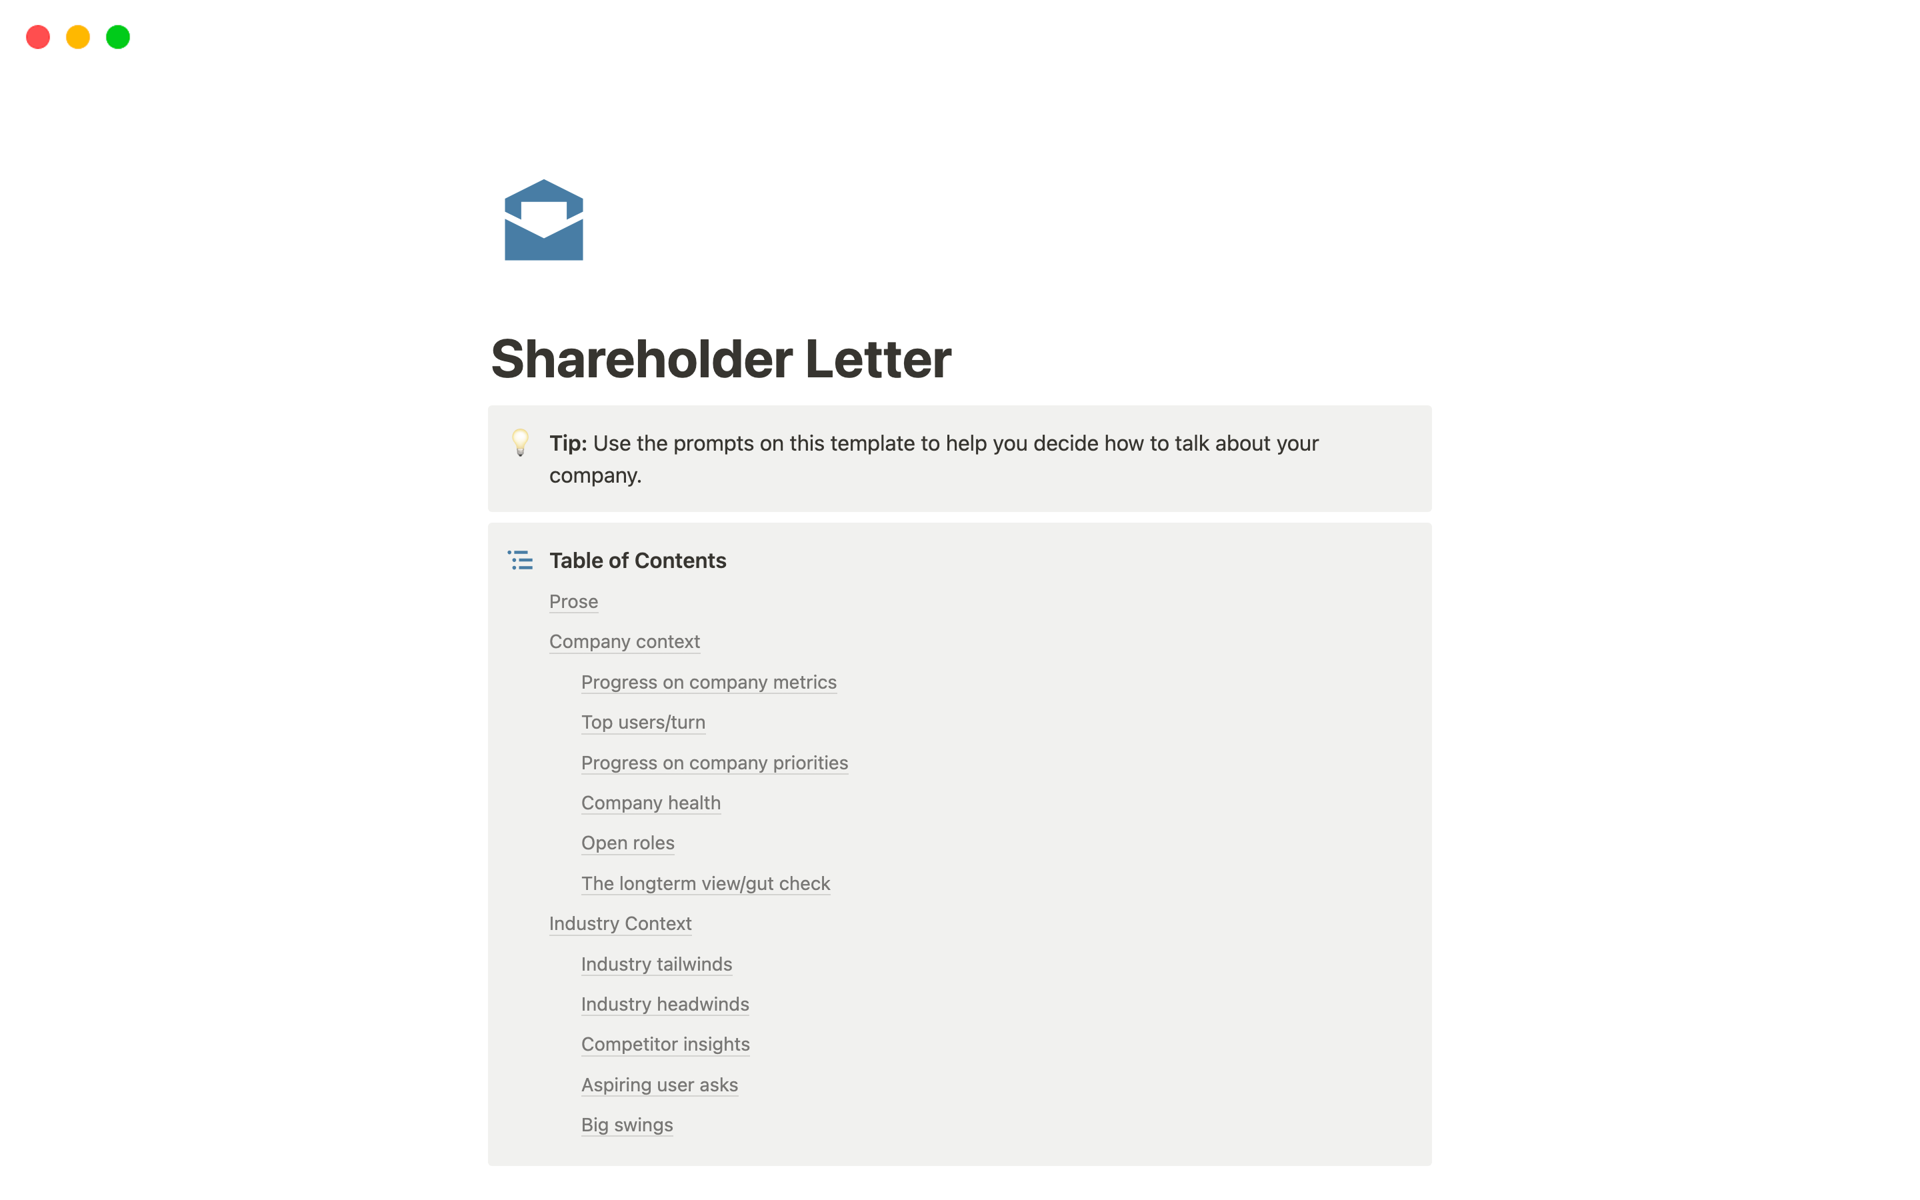 Let investors know what’s happening at your company using this Shareholder Letter template.